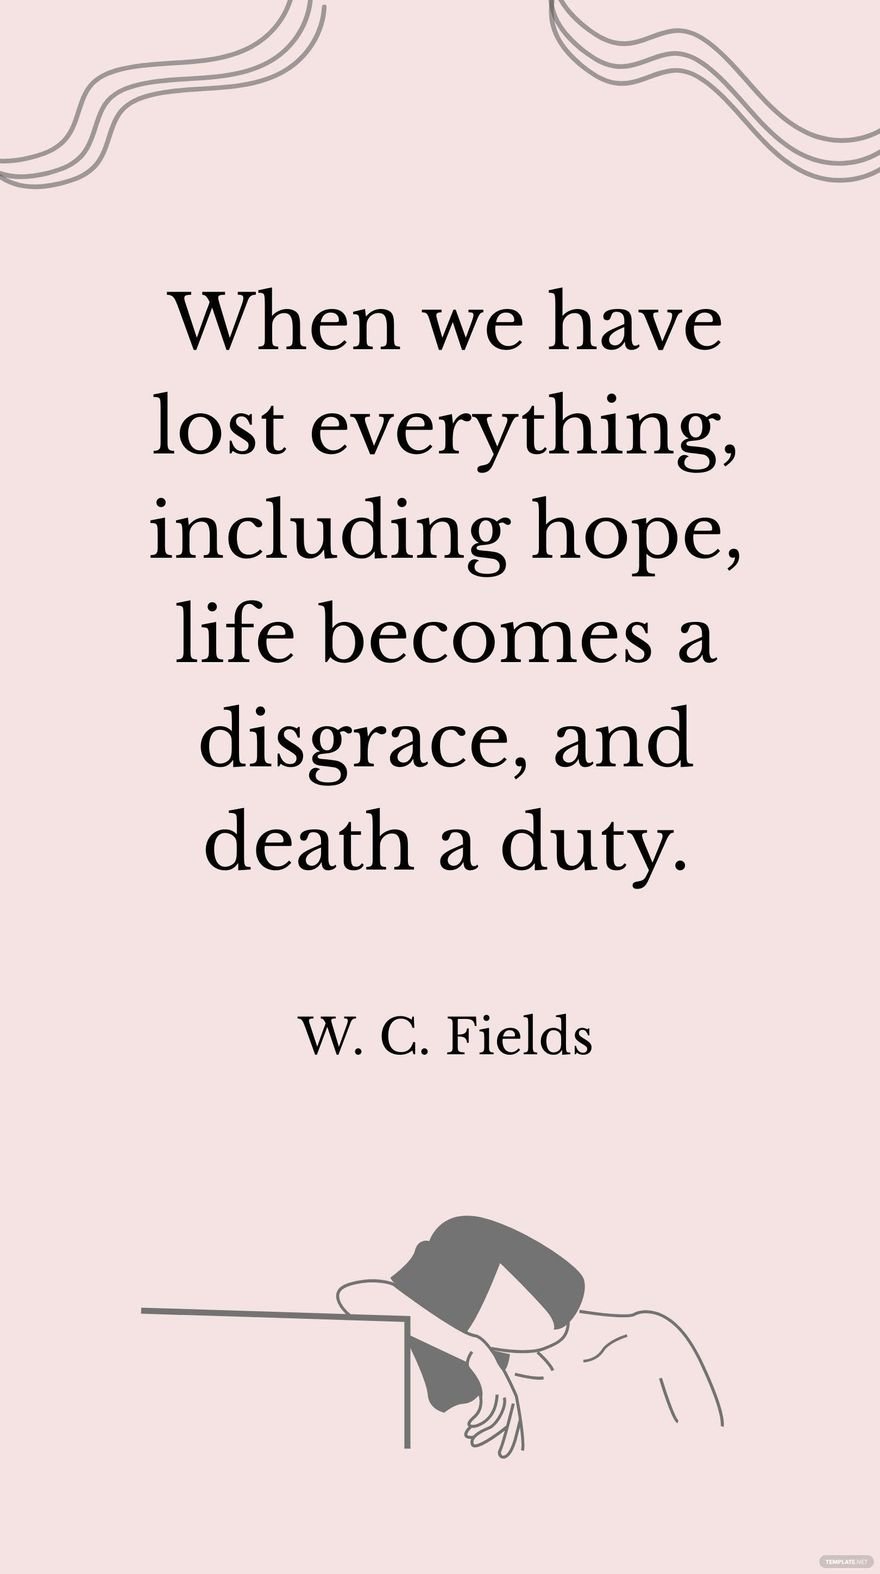 Free W. C. Fields - When we have lost everything, including hope, life becomes a disgrace, and death a duty.